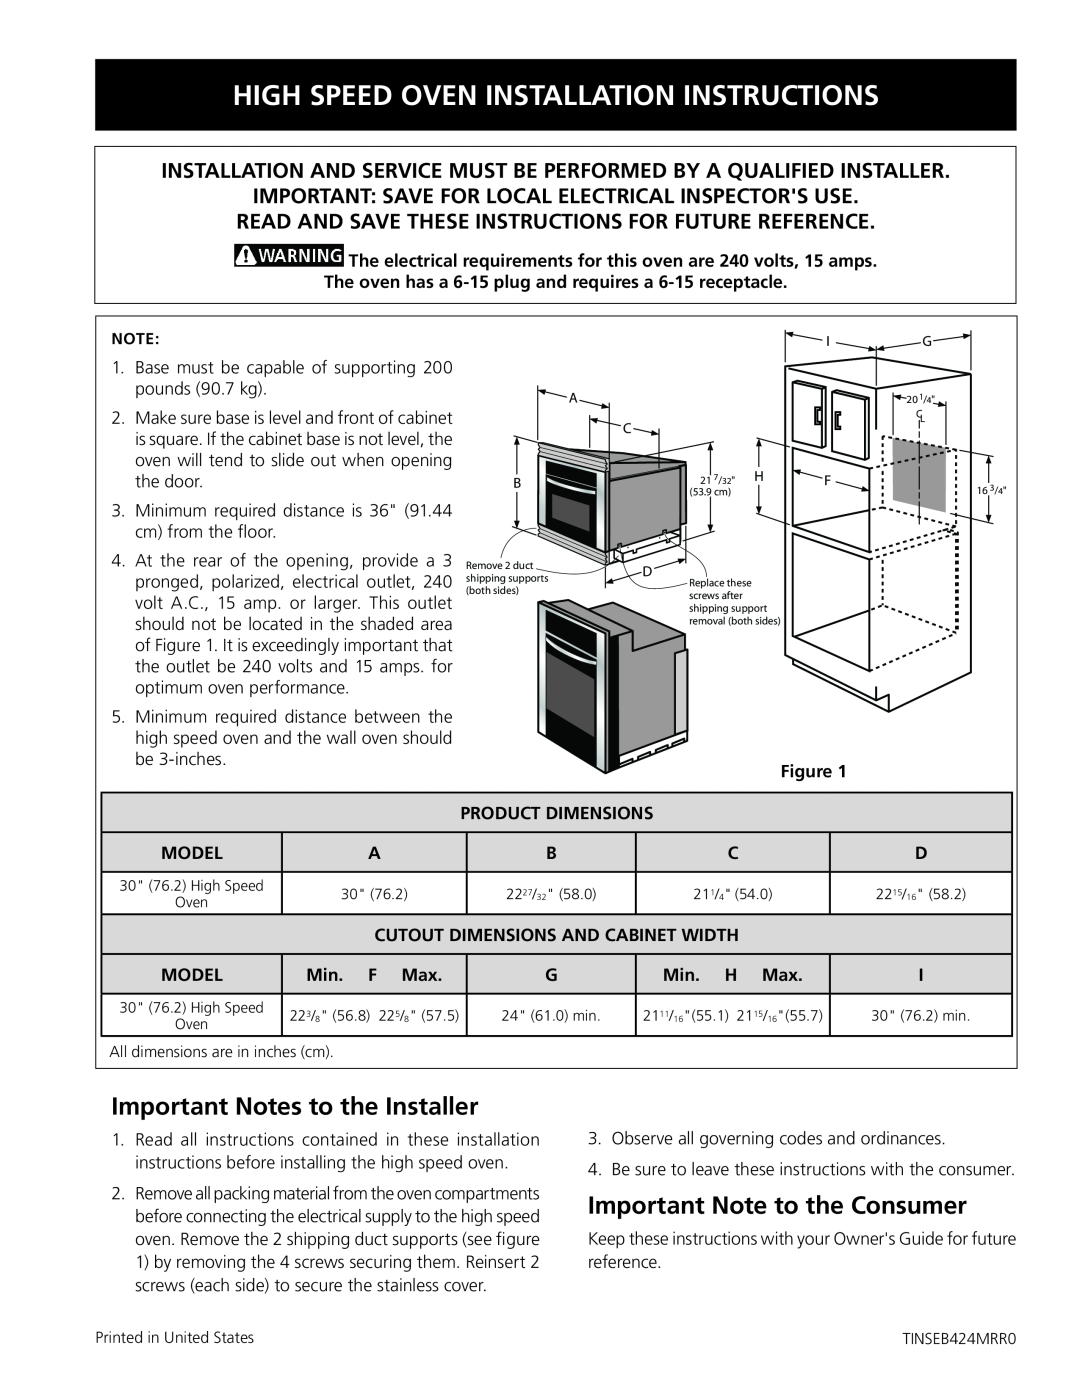 Electrolux TINSEB424MRR0 installation instructions Important Notes to the Installer, Model, Min. F Max, Min. H Max 